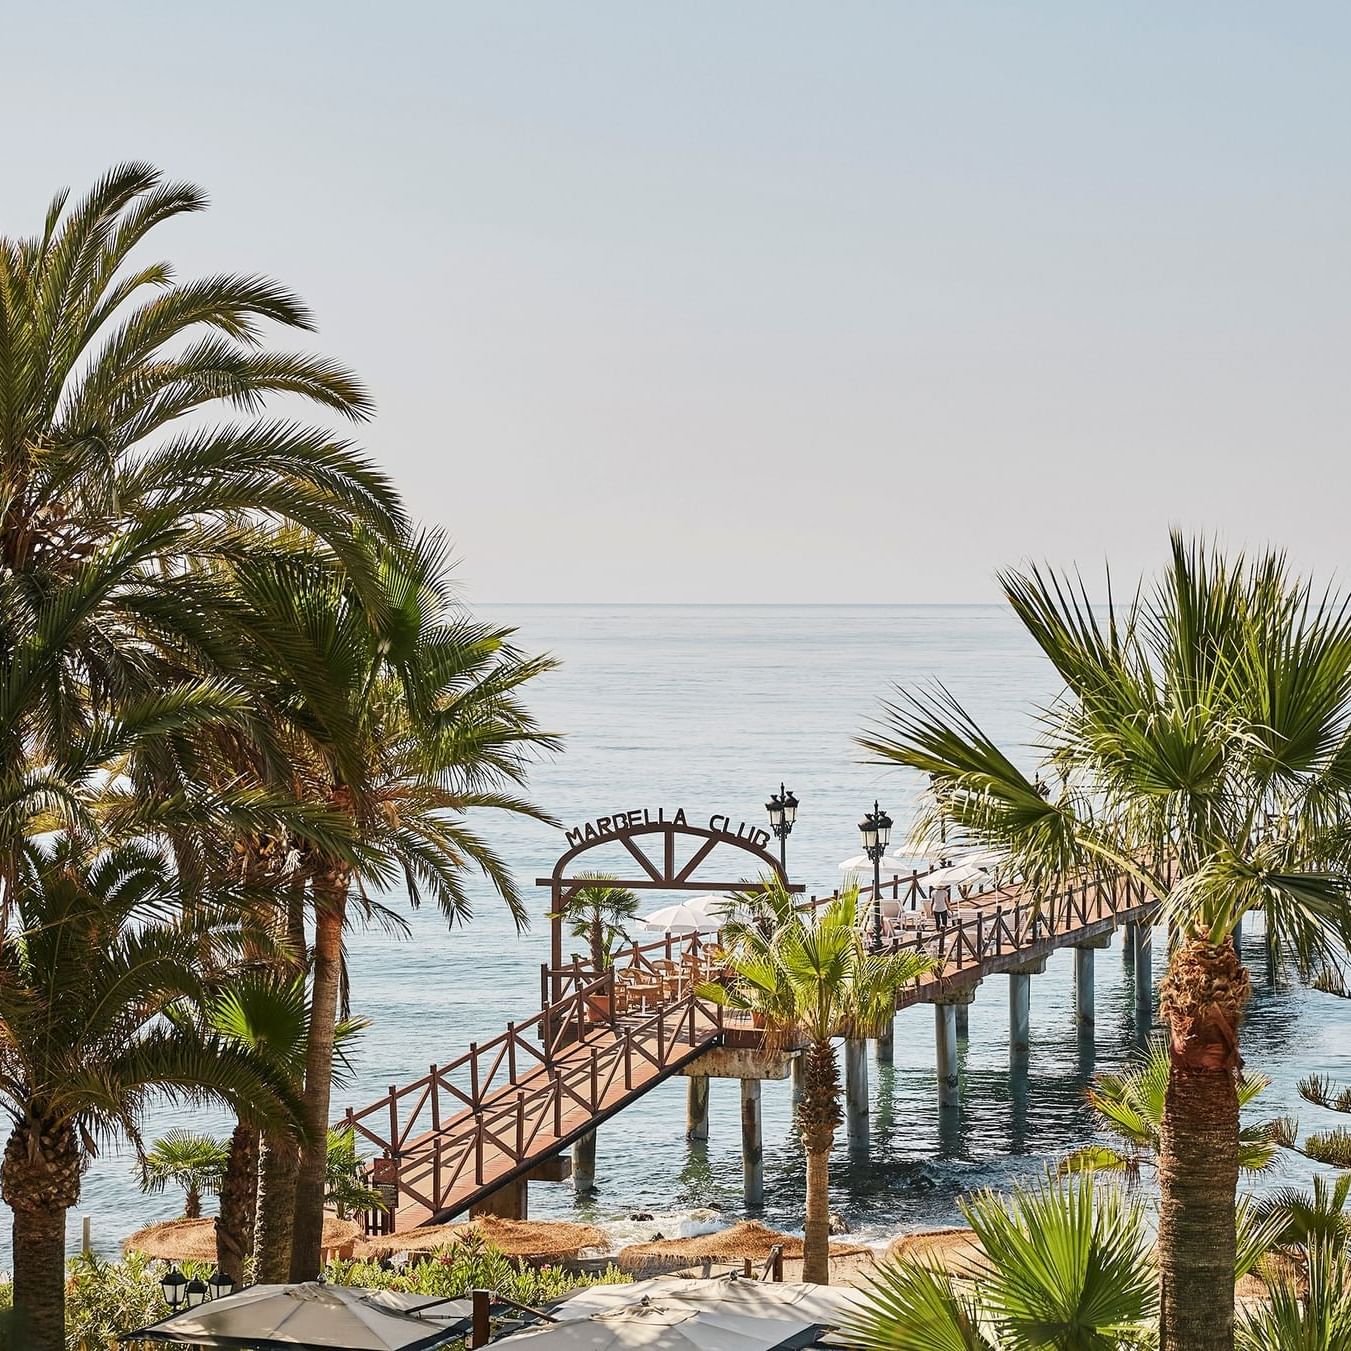 A pier in the ocean with pine trees at Marbella Club Hotel